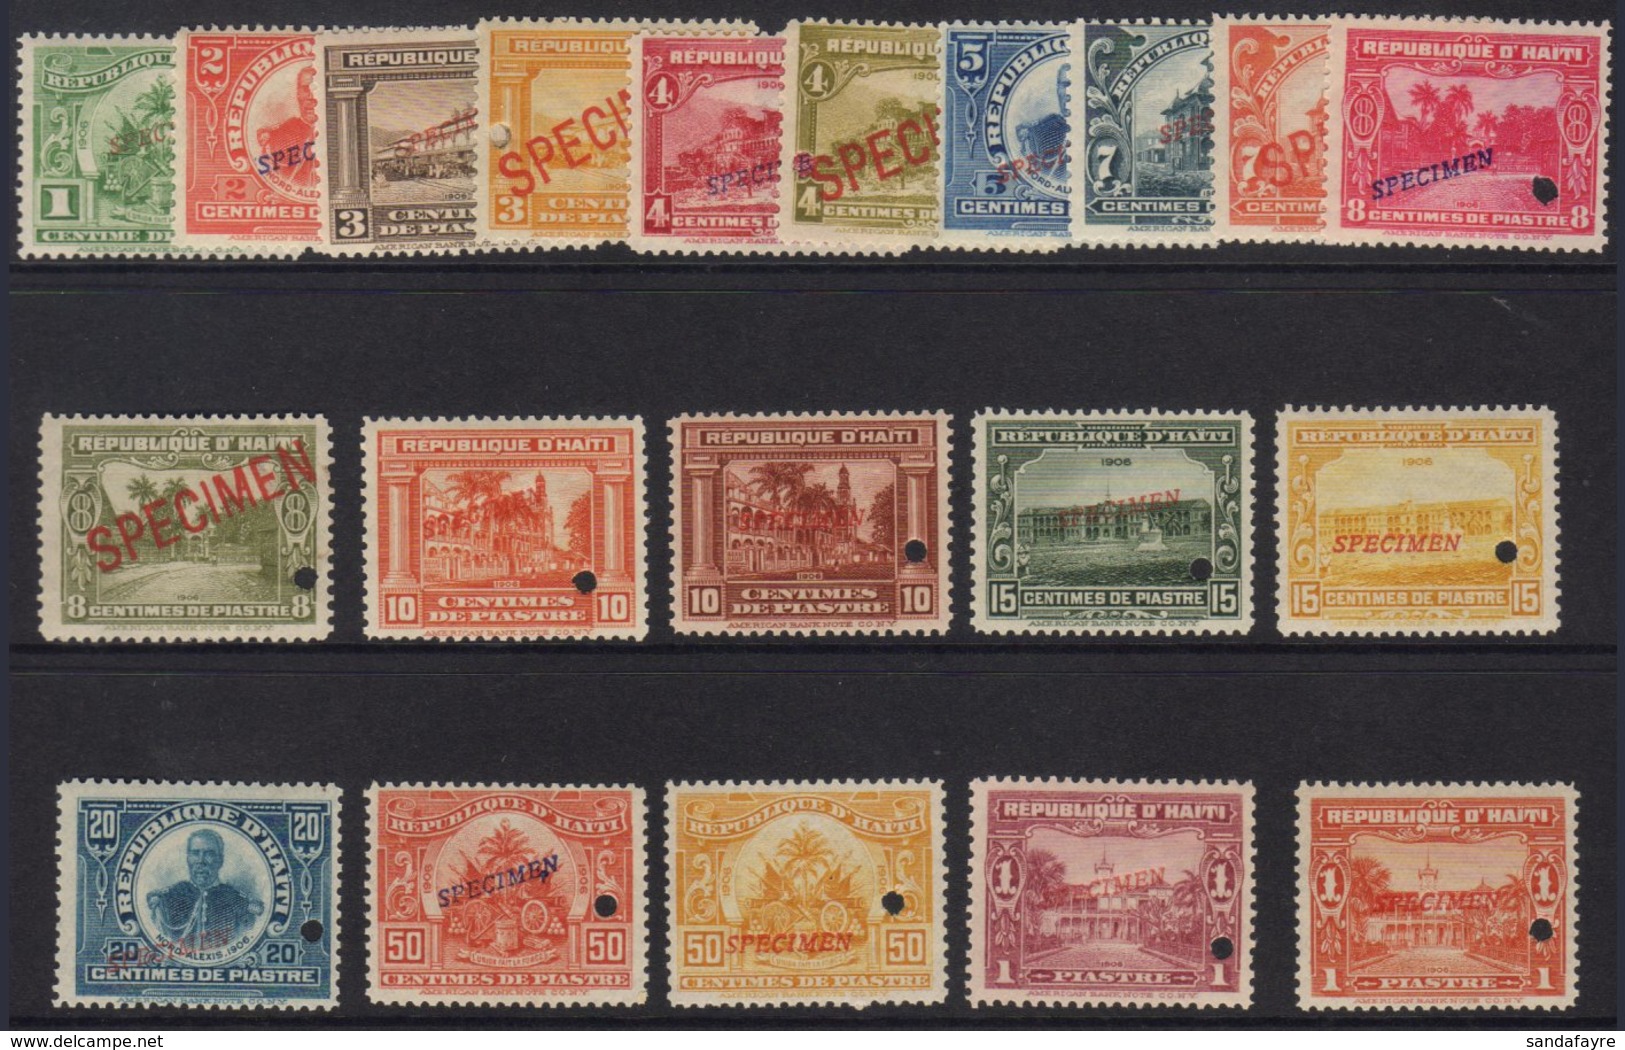 1906-13 Pictorial Complete Set, Scott 125/144, Each With 'SPECIMEN' Overprint And Security Punch Hole, Fresh Never Hinge - Haiti